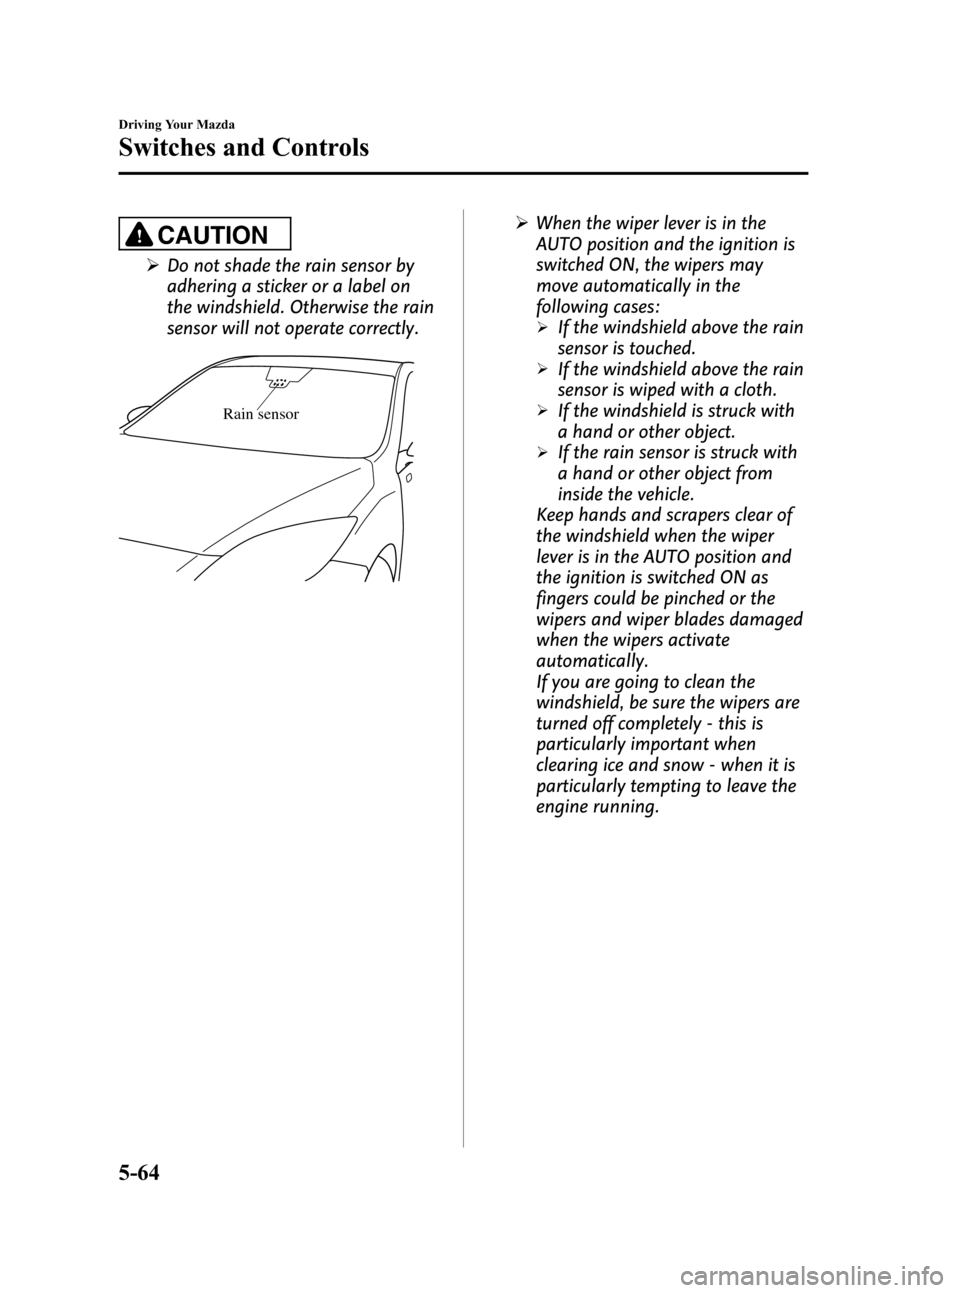 MAZDA MODEL 3 HATCHBACK 2010  Owners Manual (in English) Black plate (220,1)
CAUTION
ØDo not shade the rain sensor by
adhering a sticker or a label on
the windshield. Otherwise the rain
sensor will not operate correctly.
Rain sensor
ØWhen the wiper lever 